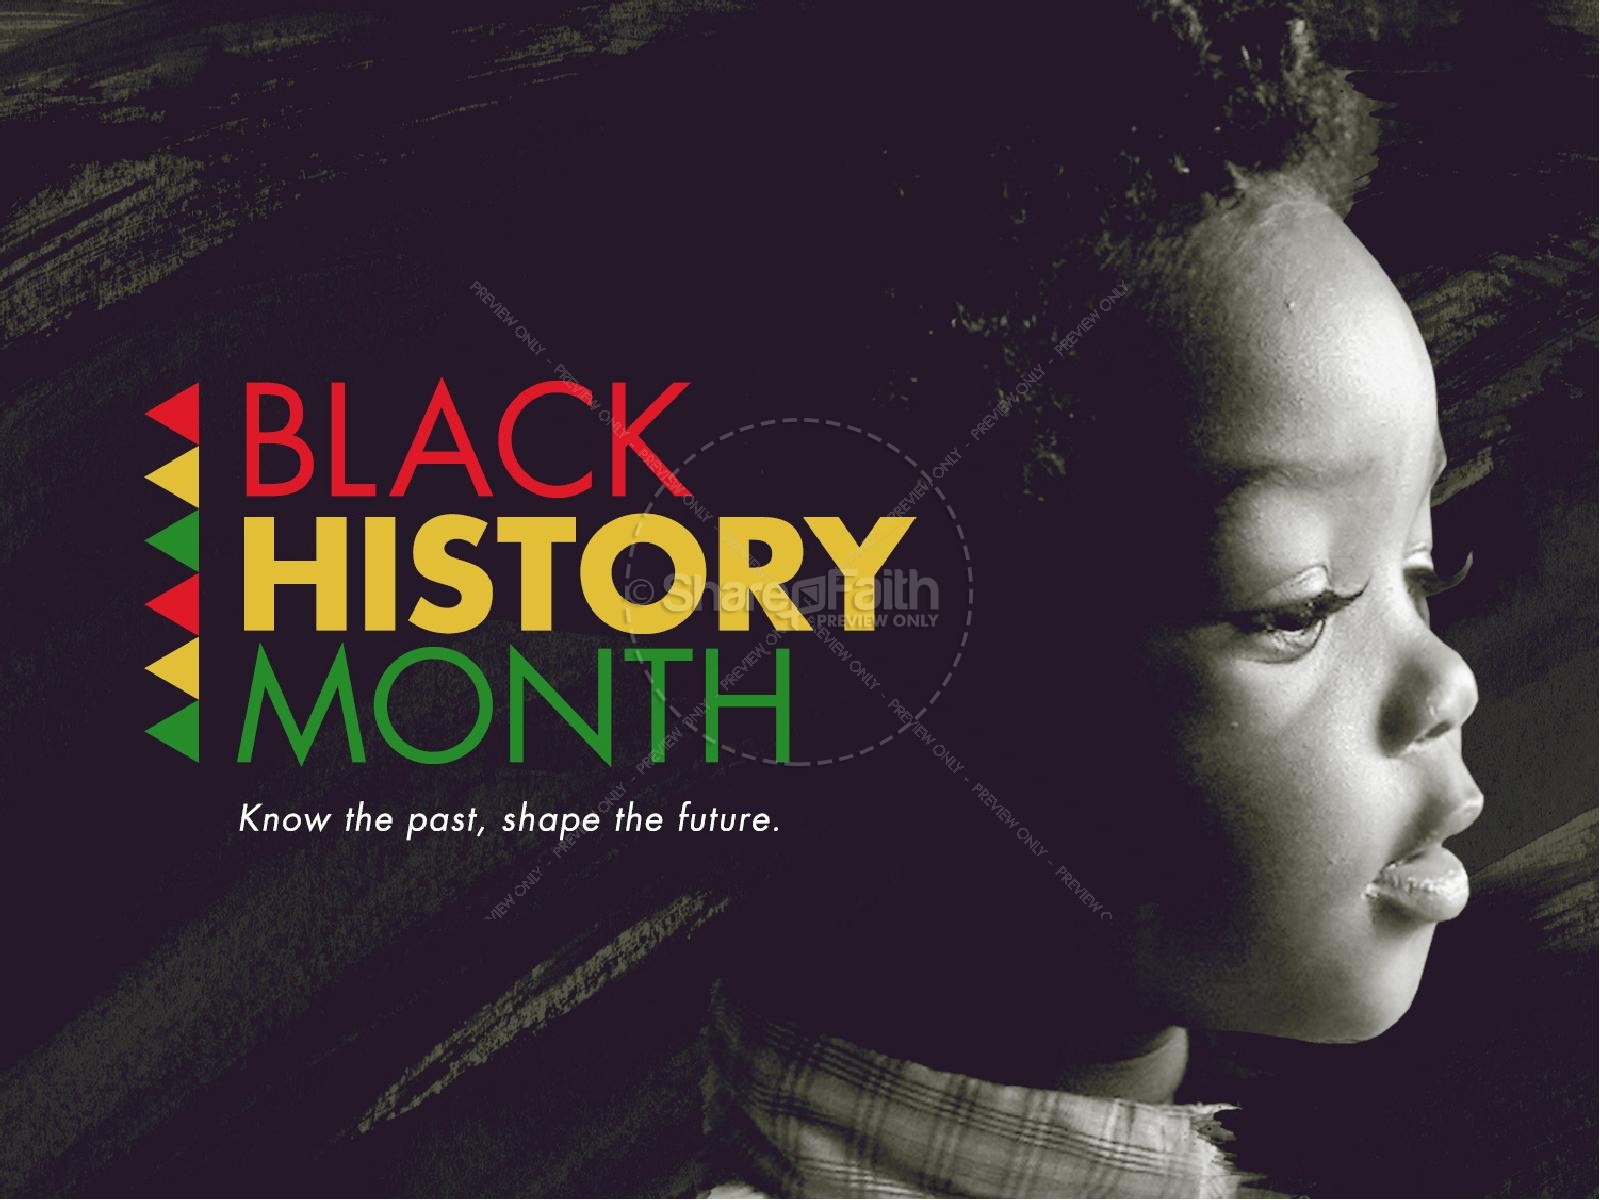 black-history-month-christian-powerpoint-black-history-month-2017